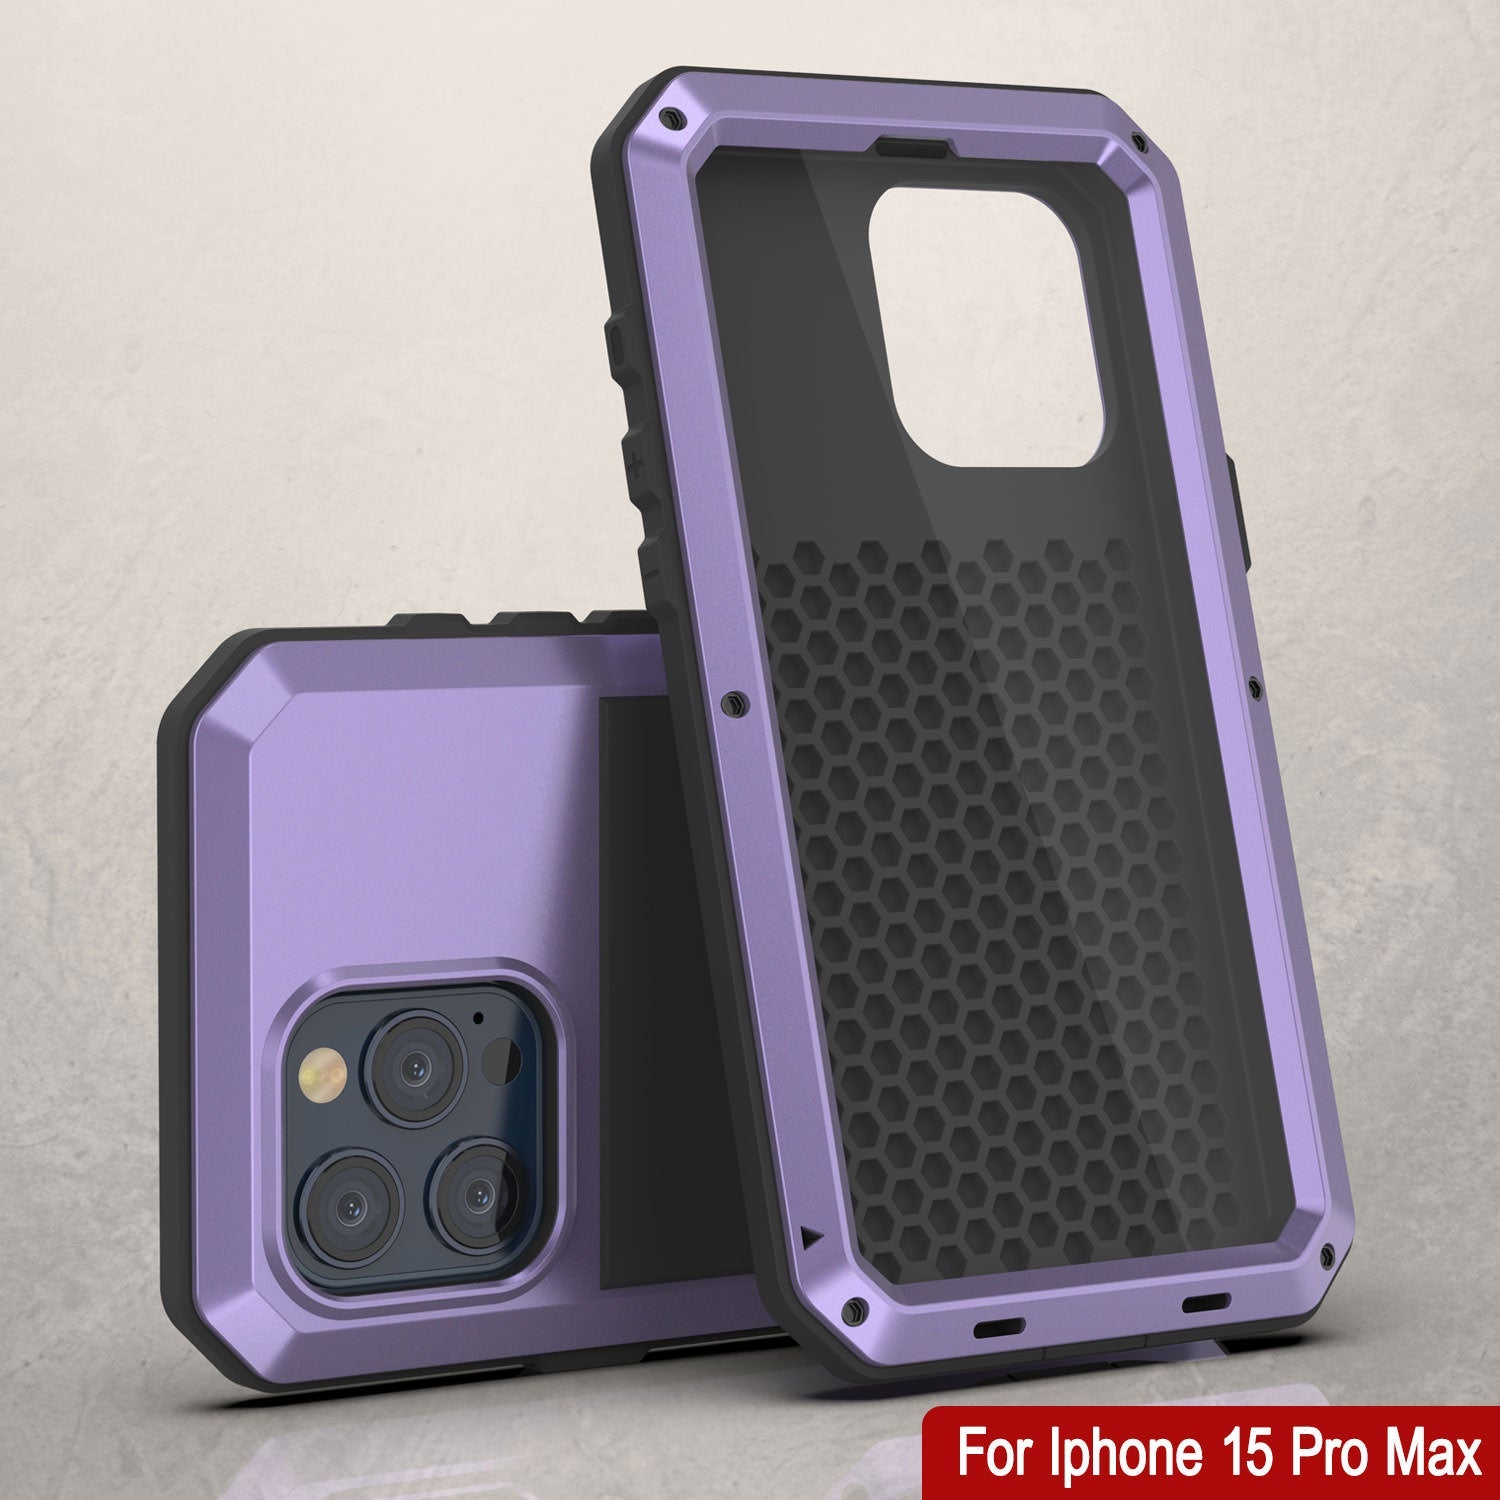 iPhone 15 Pro Max Metal Case, Heavy Duty Military Grade Armor Cover [shock proof] Full Body Hard [Purple]